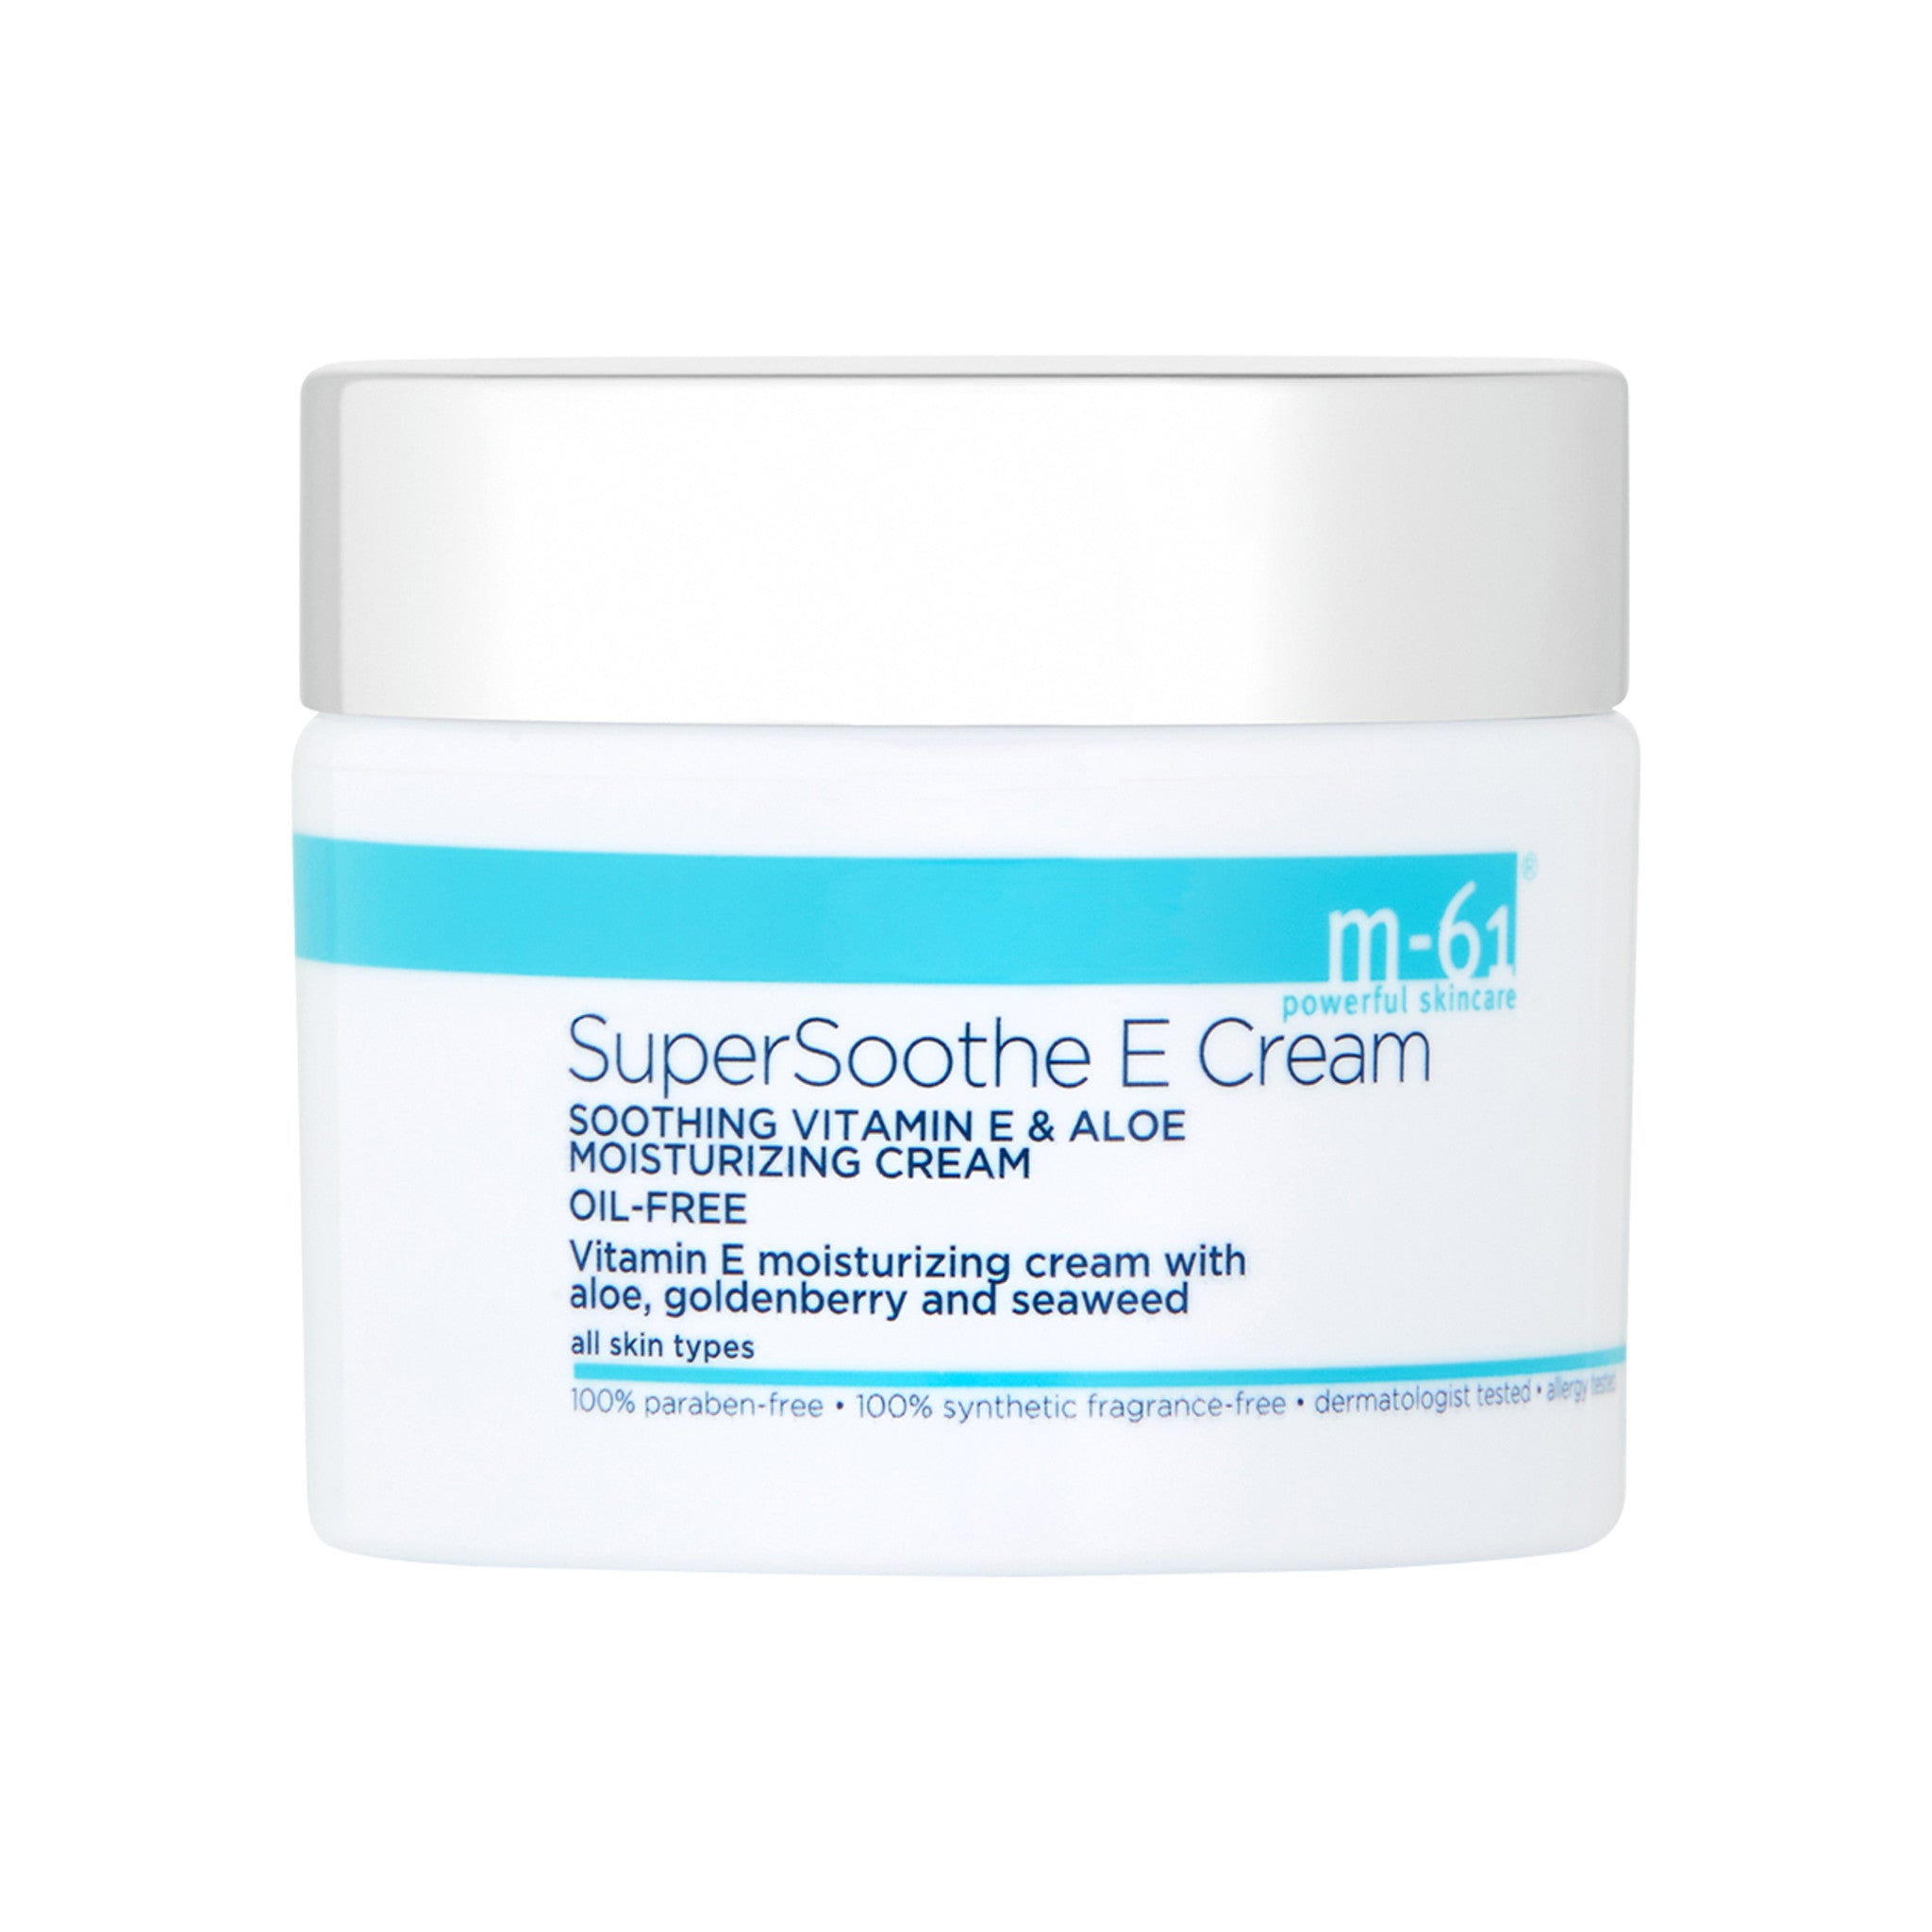 M-61 SuperSoothe E Cream main image.